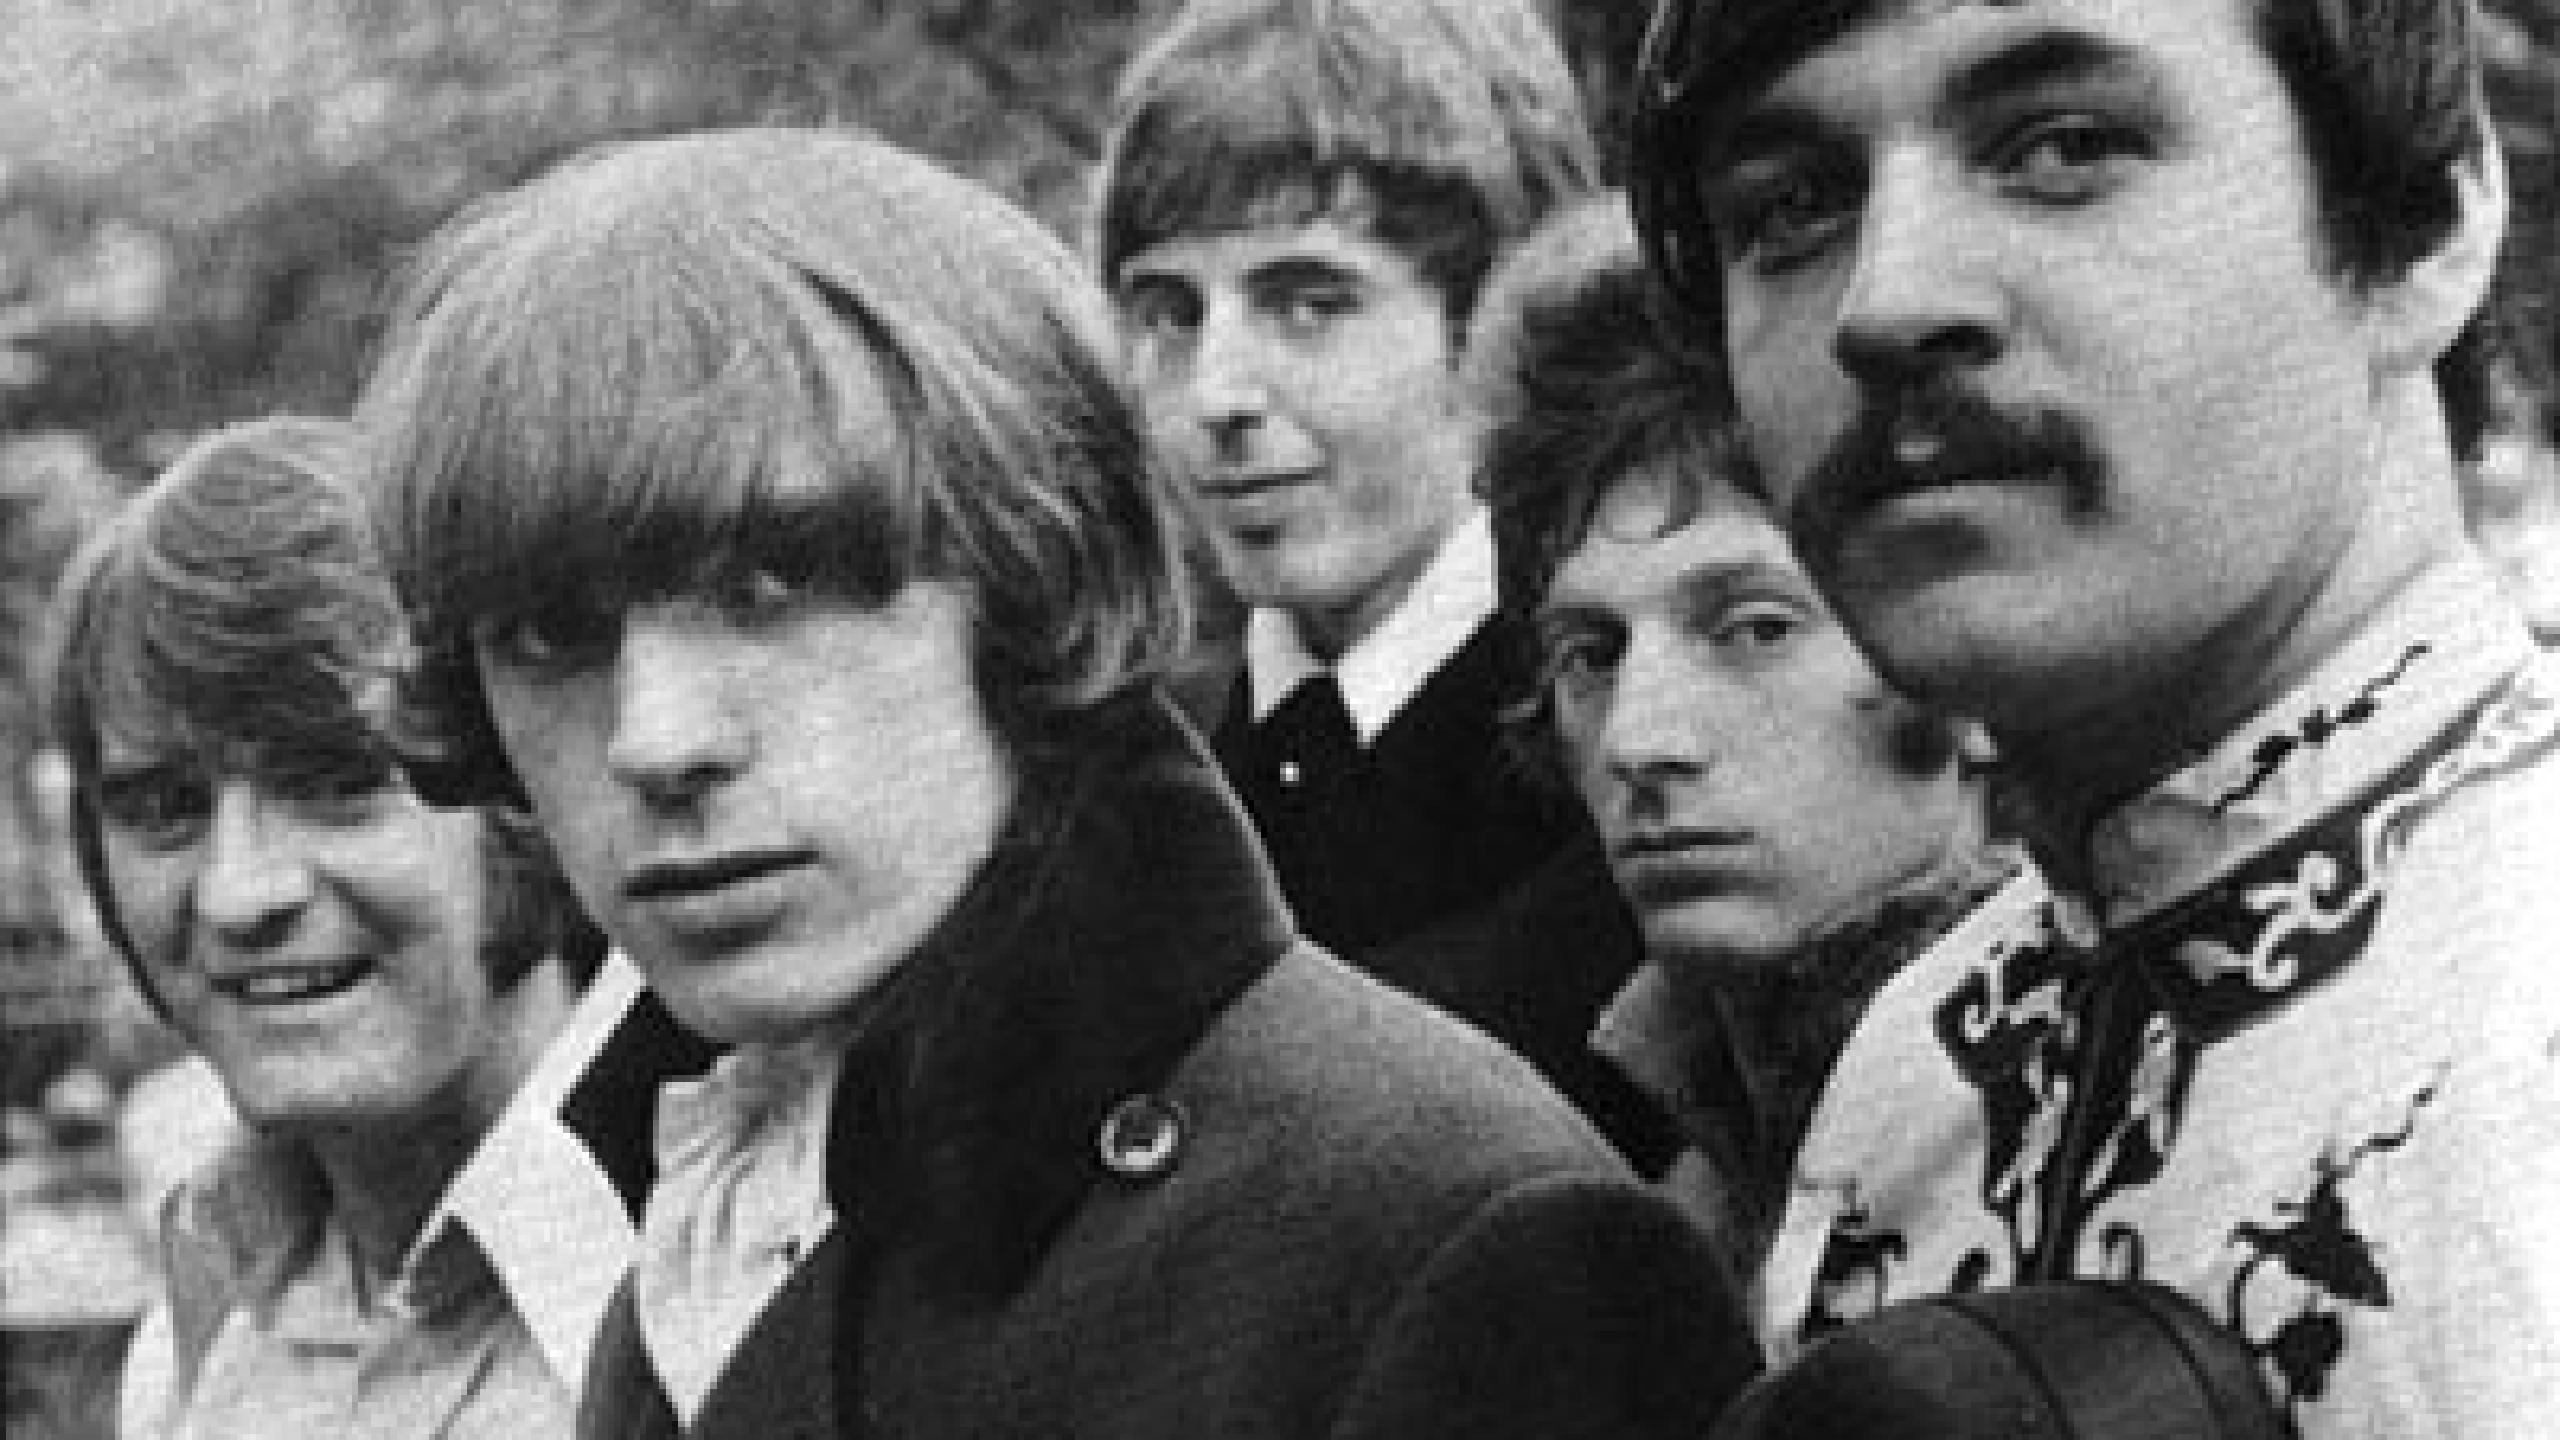 songs by procol harum